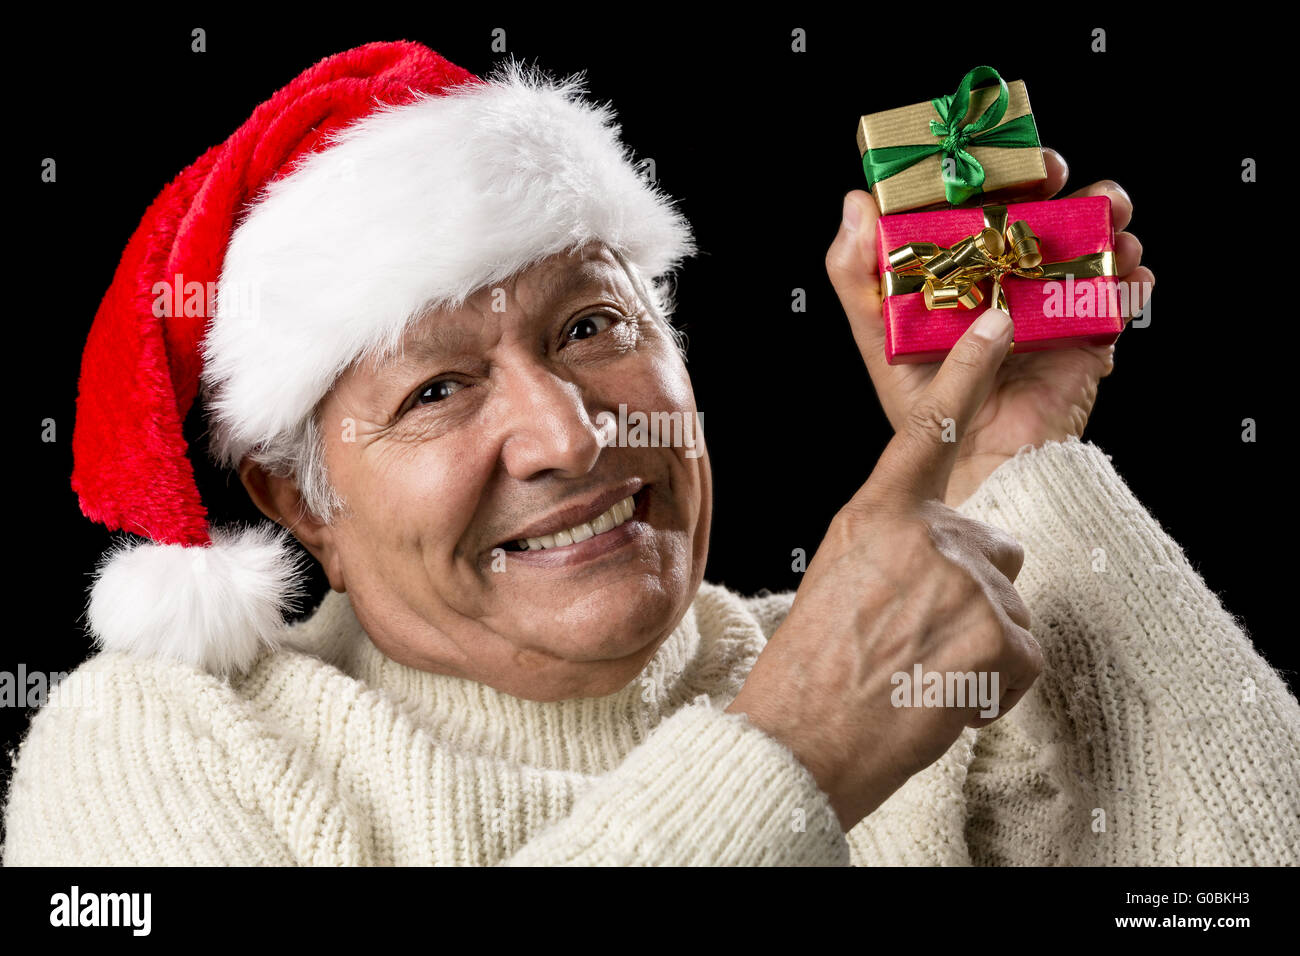 Smiling Senior Pointing At Two Wrapped Xmas Gifts Stock Photo